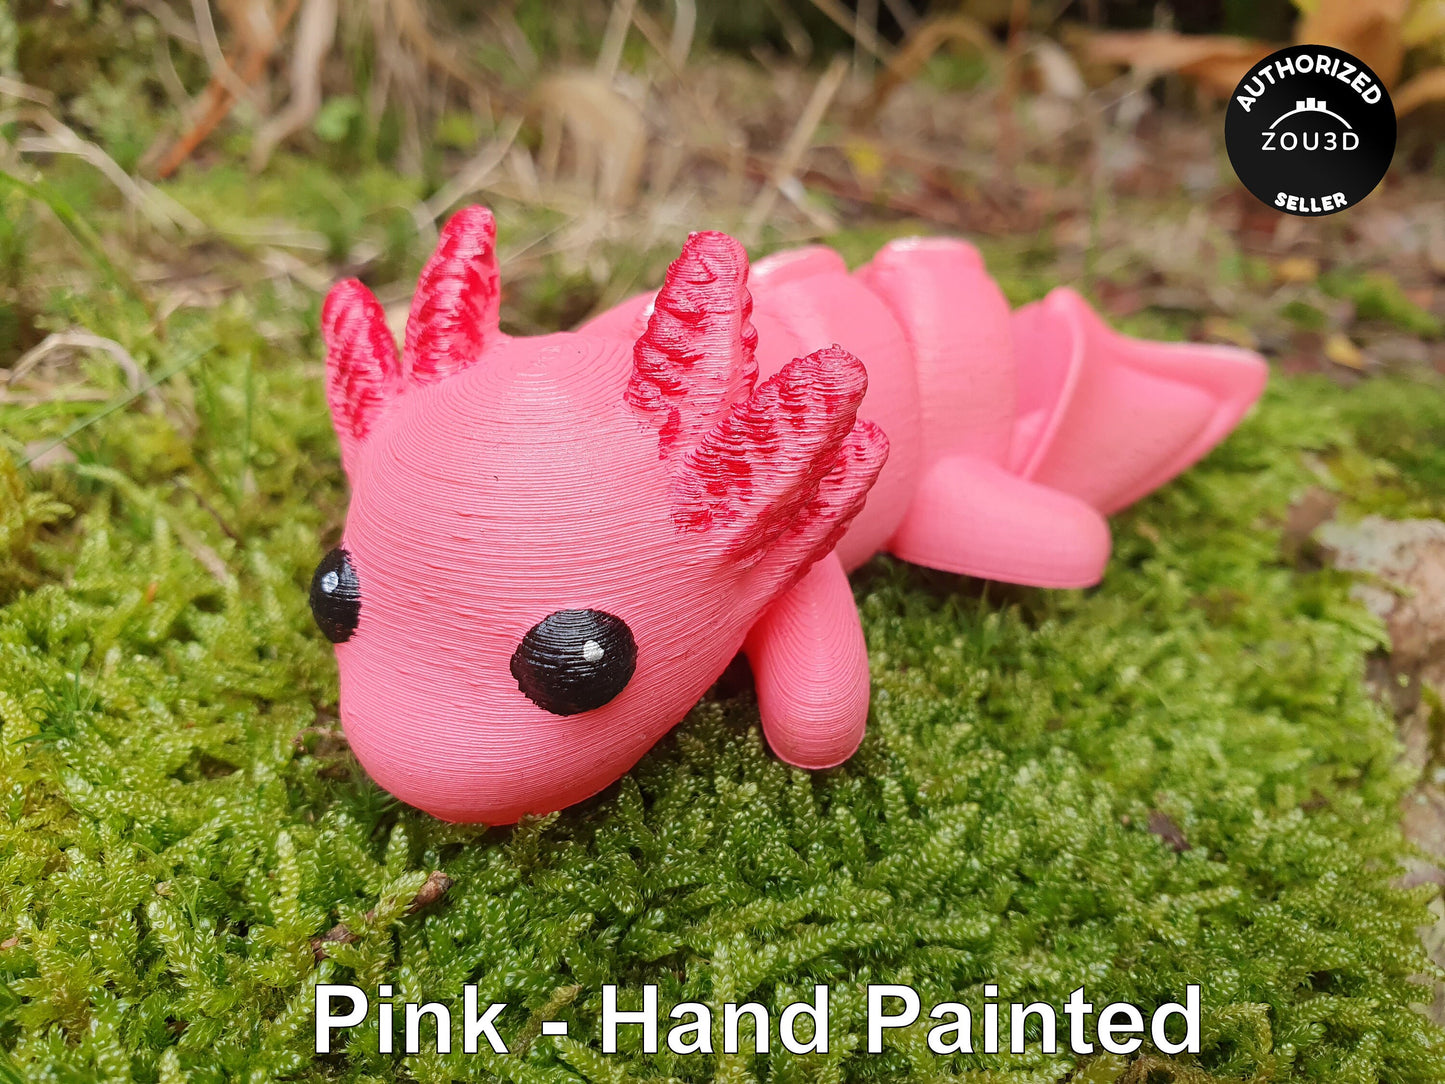 Cute Baby Axolotl - Articulated Flexible 3D Print. Professionally Hand painted finishing details